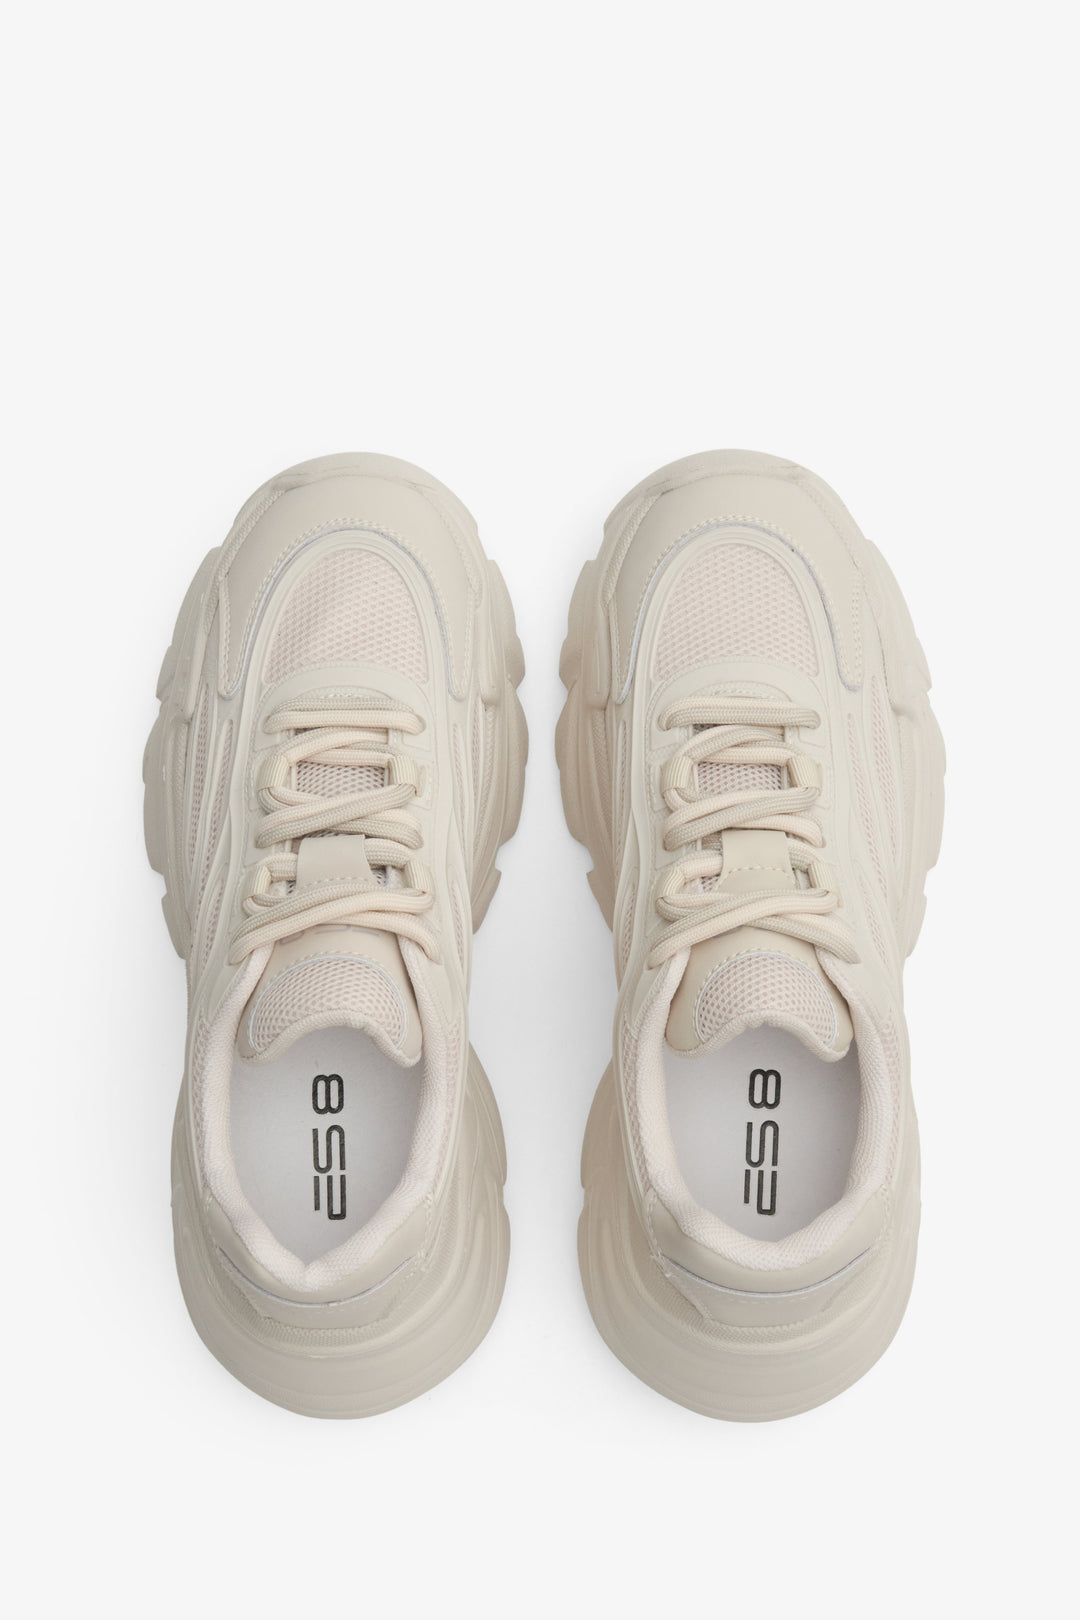 Women's beige chunky platform sneakers ES 8 - presentation from above.